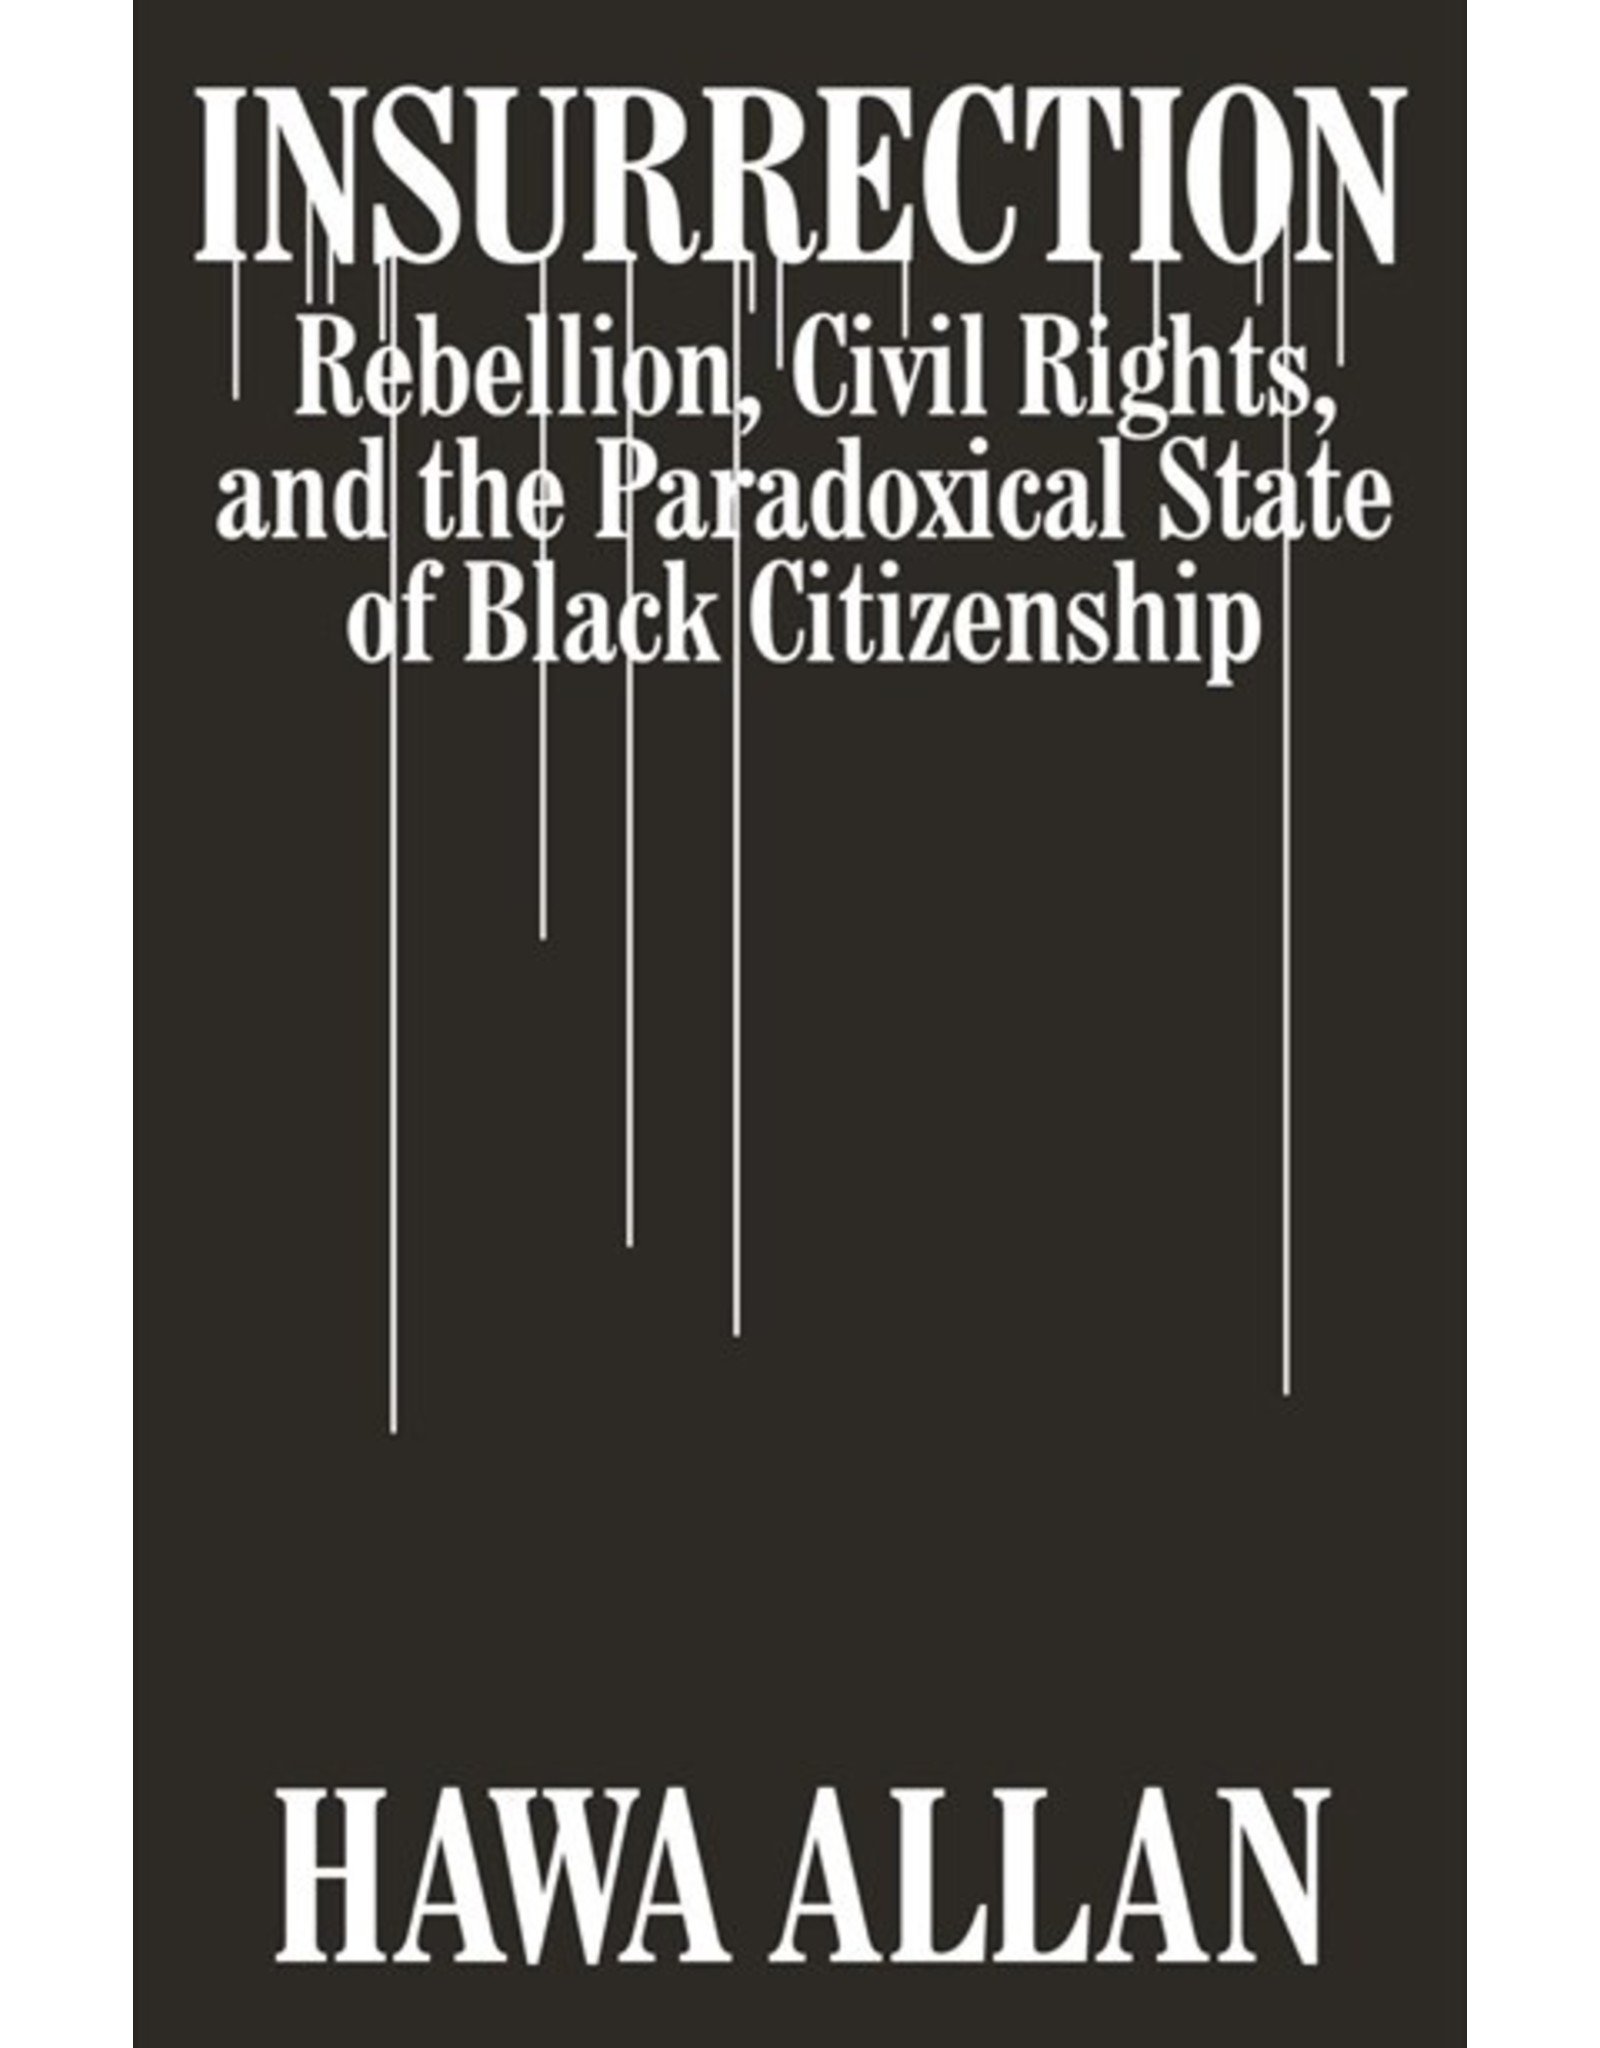 Books Insurrection: Rebellion, Civil Rights and the Paradoxical State of Black Citizenship by Hawa Allen